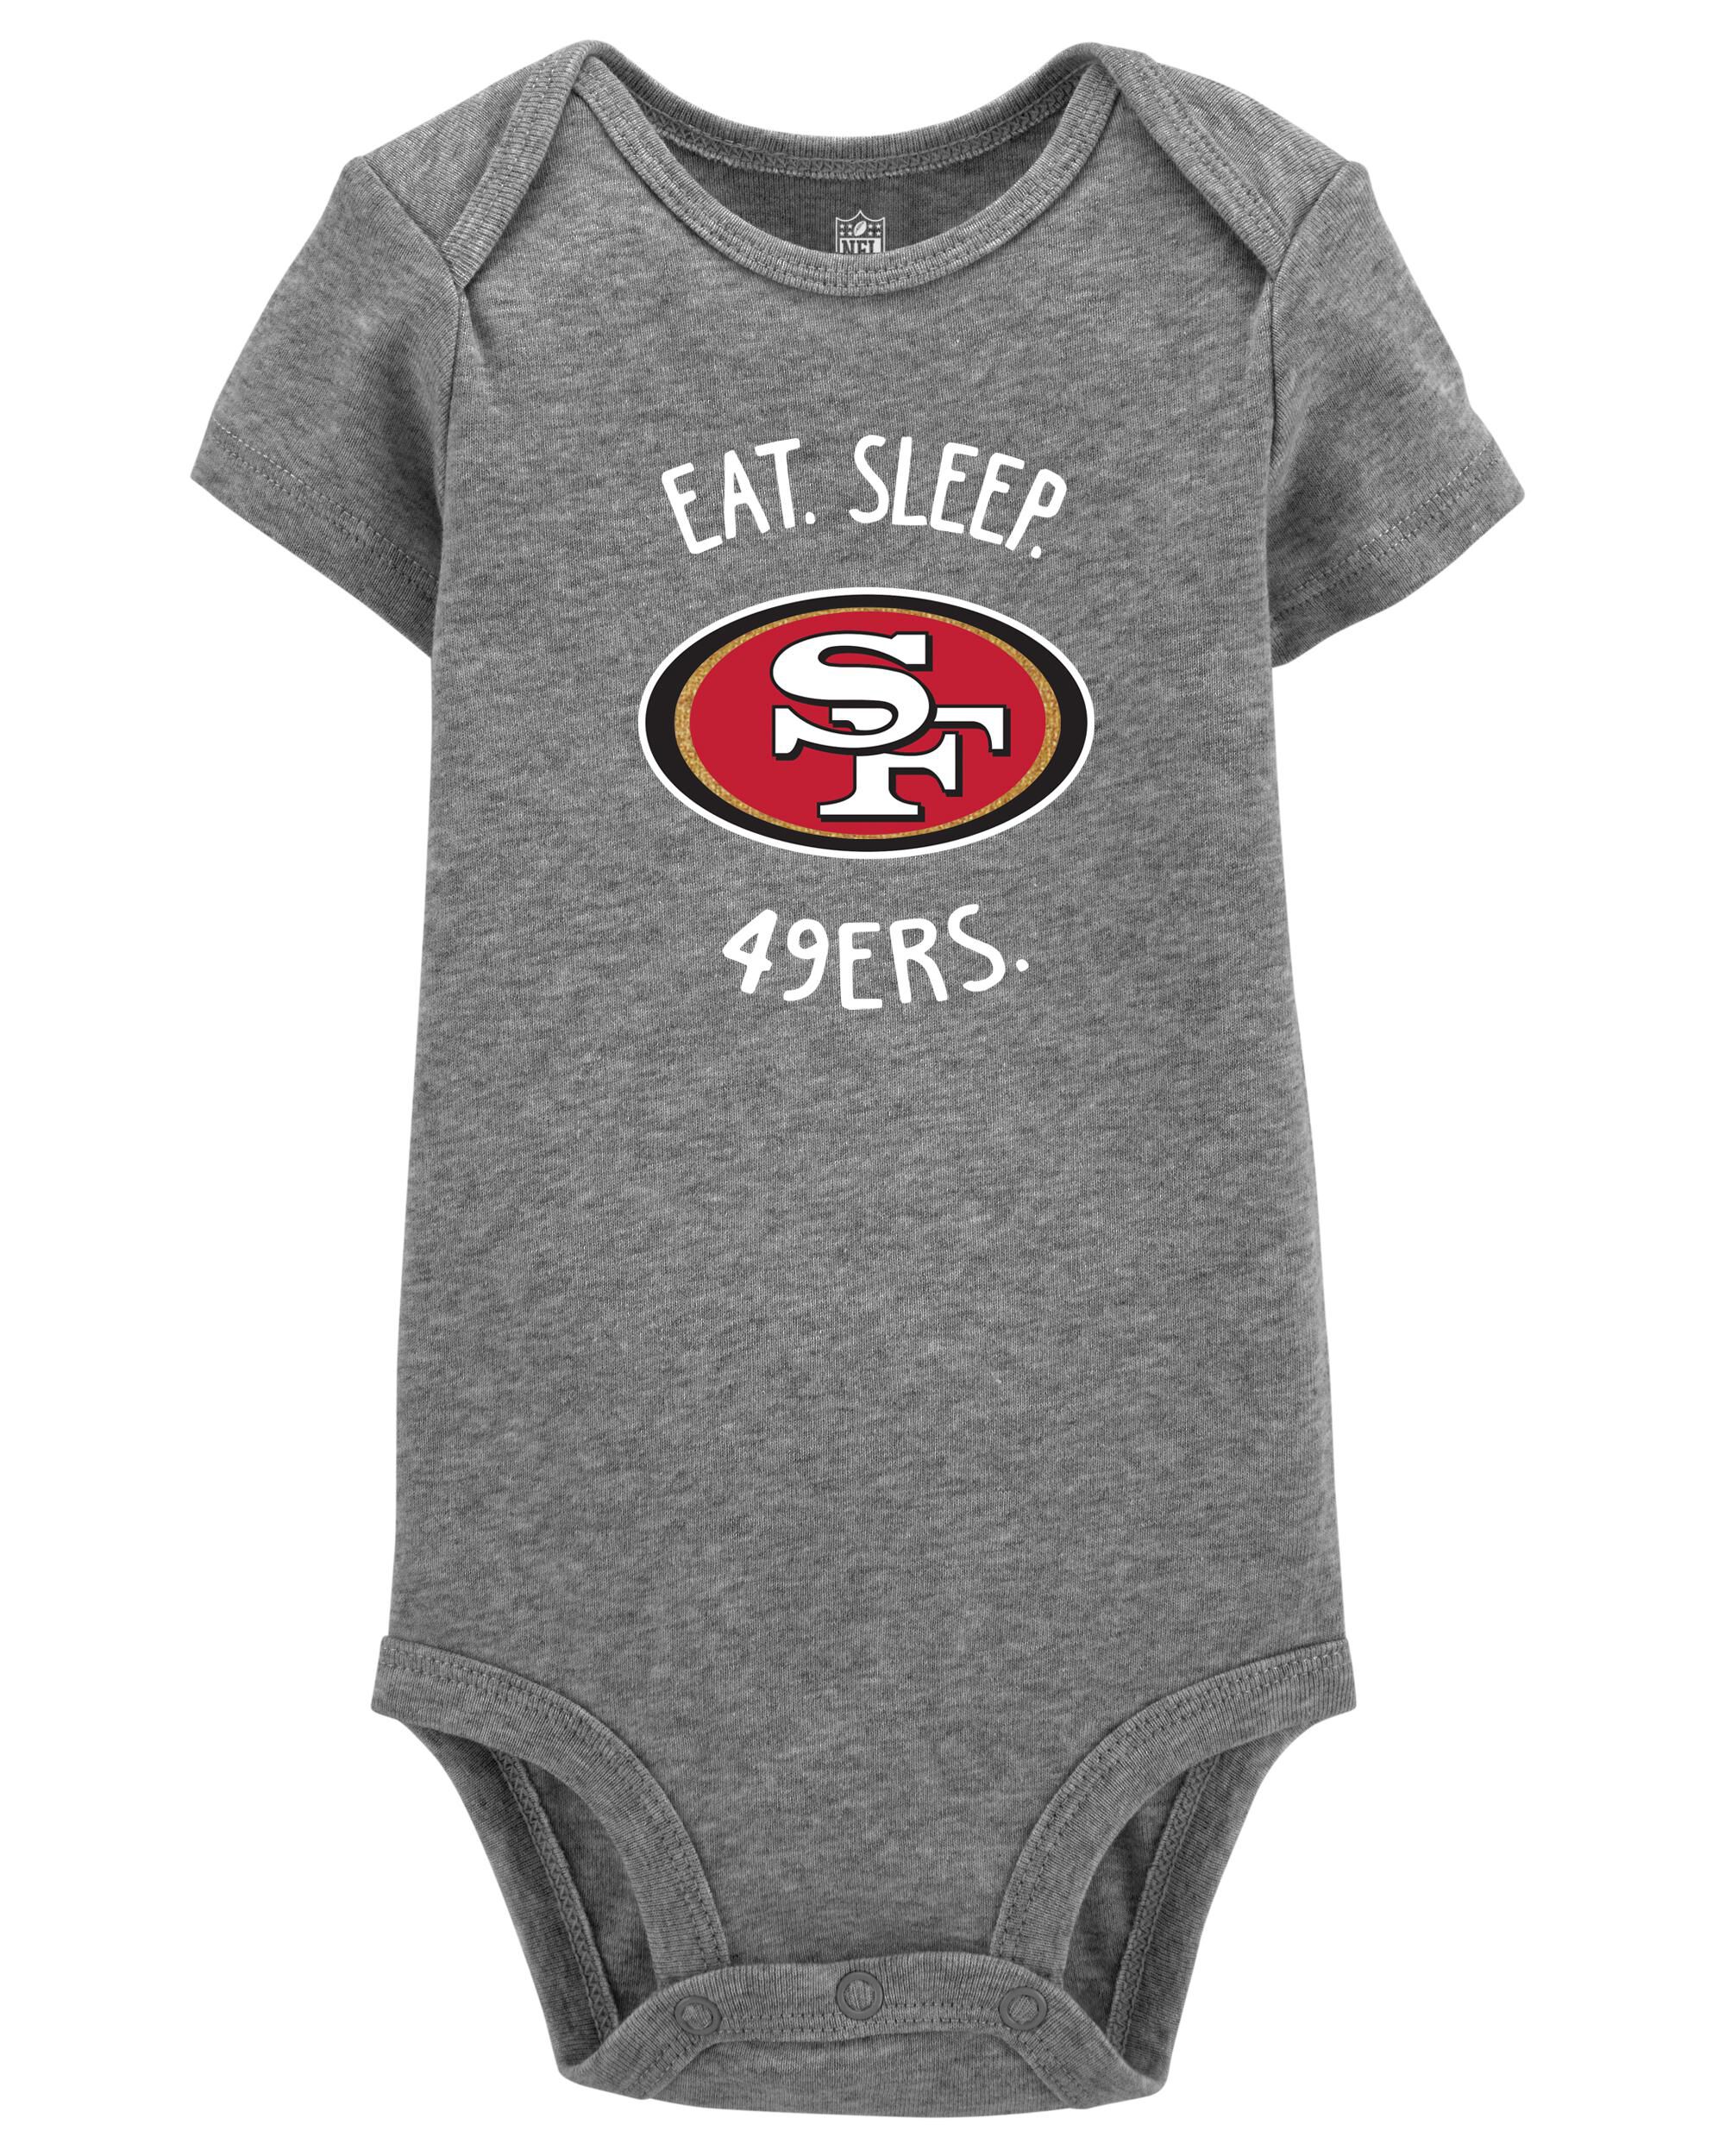 49ers baby jersey